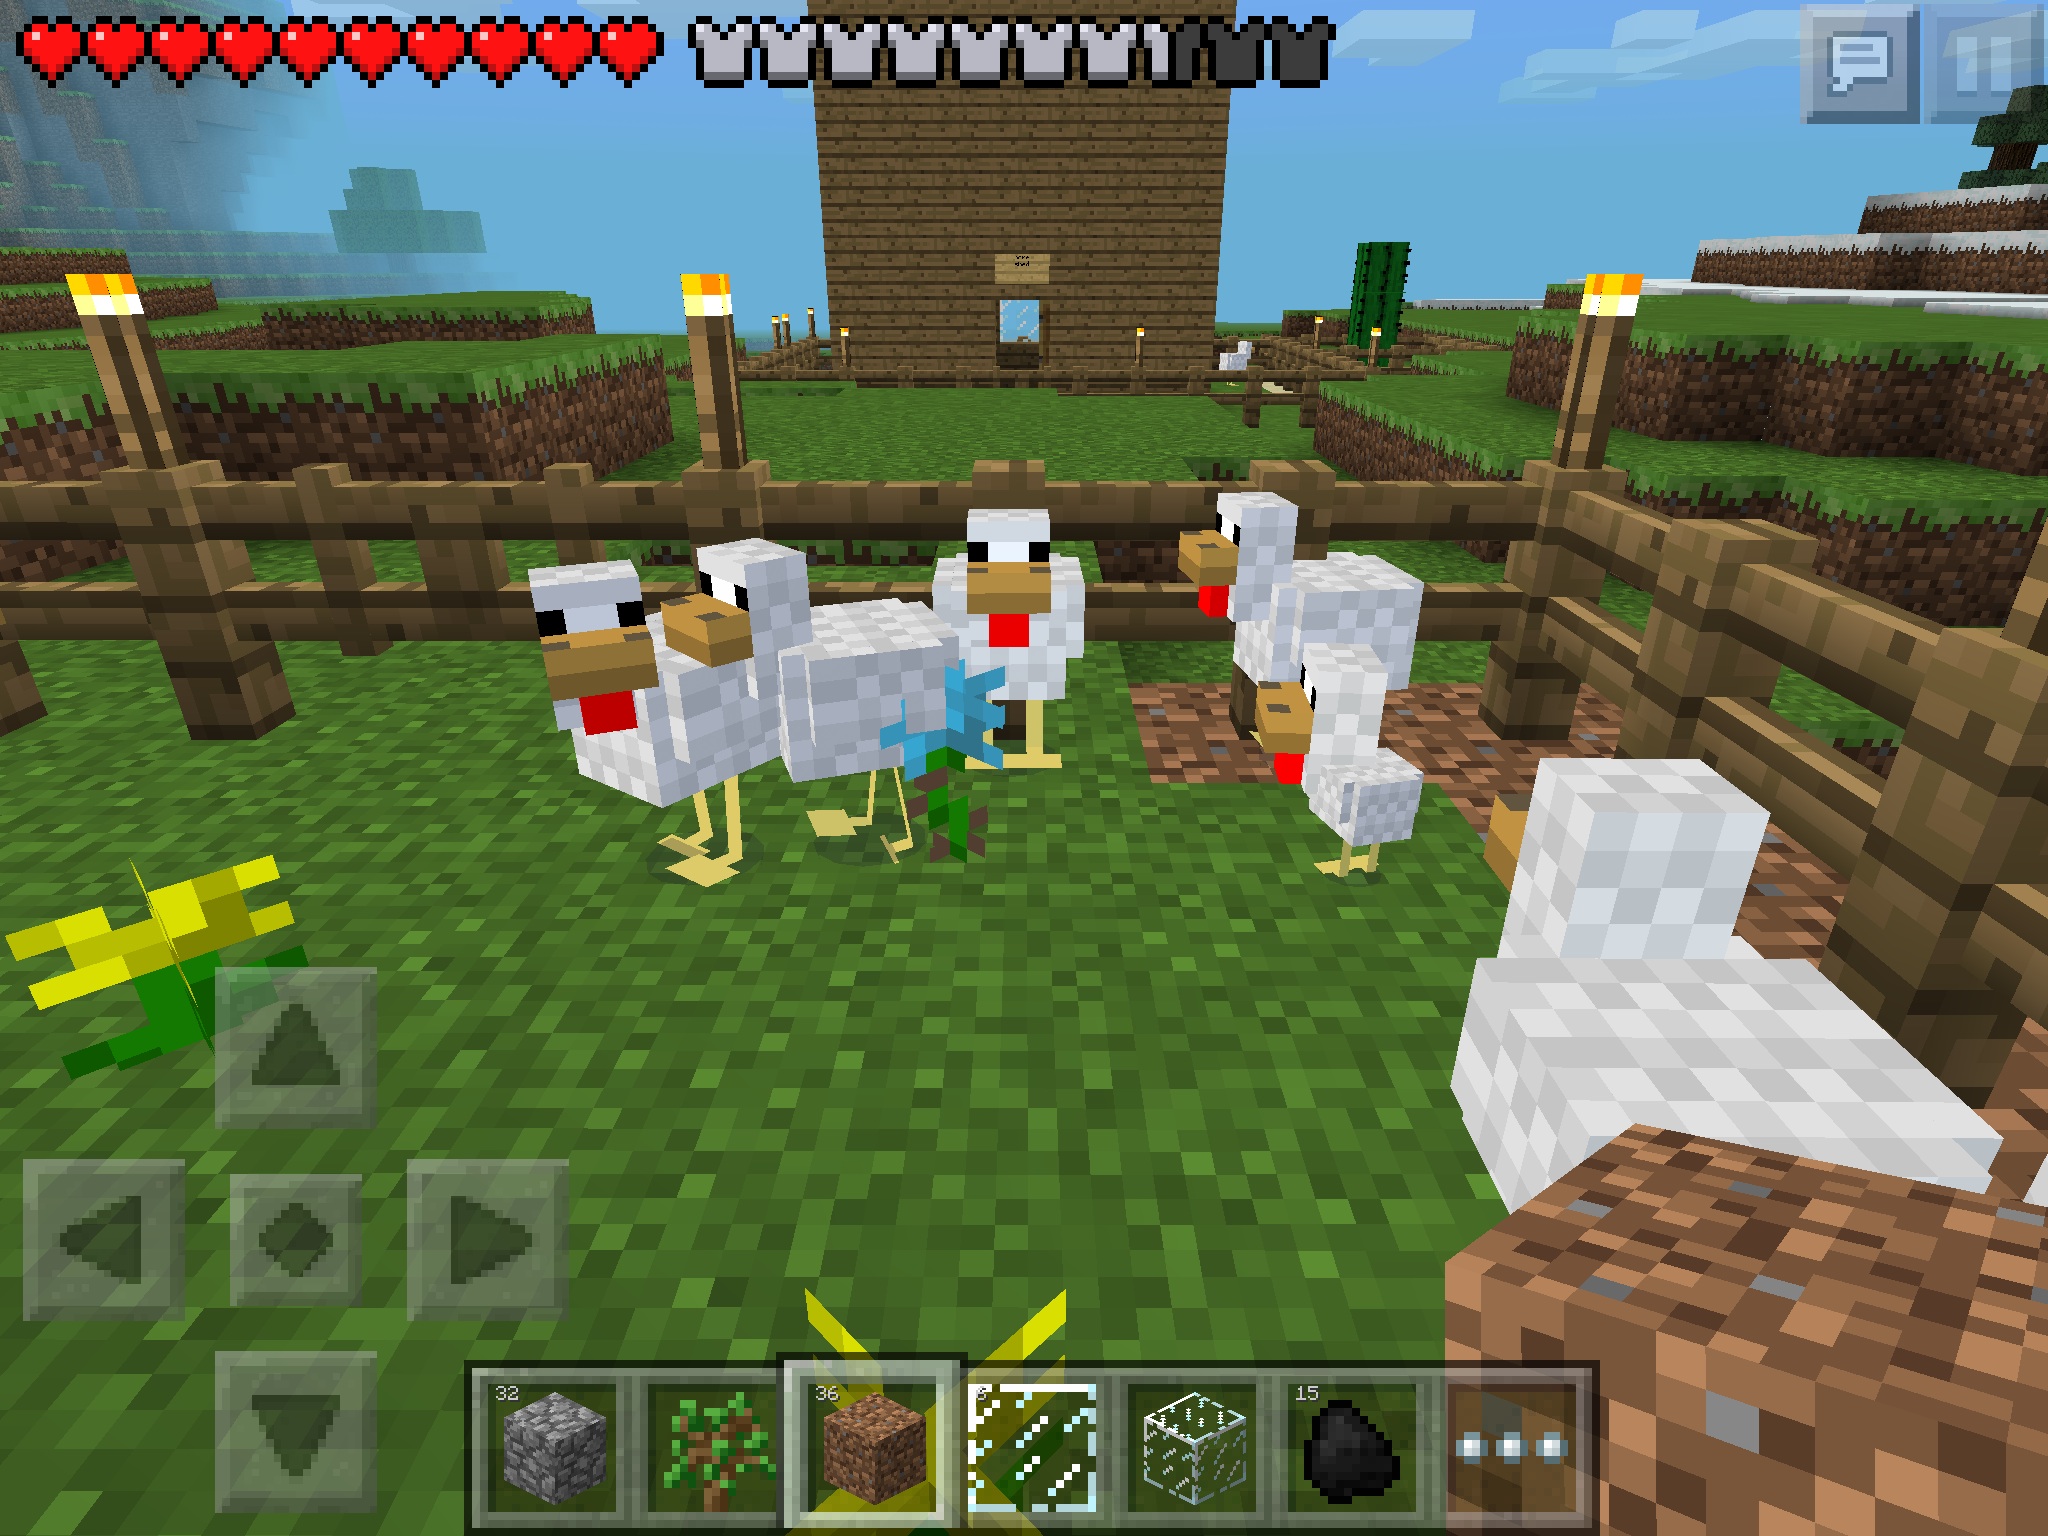 Chickens Hang Out At My Chicken Farm Minecraft Pocket Edition